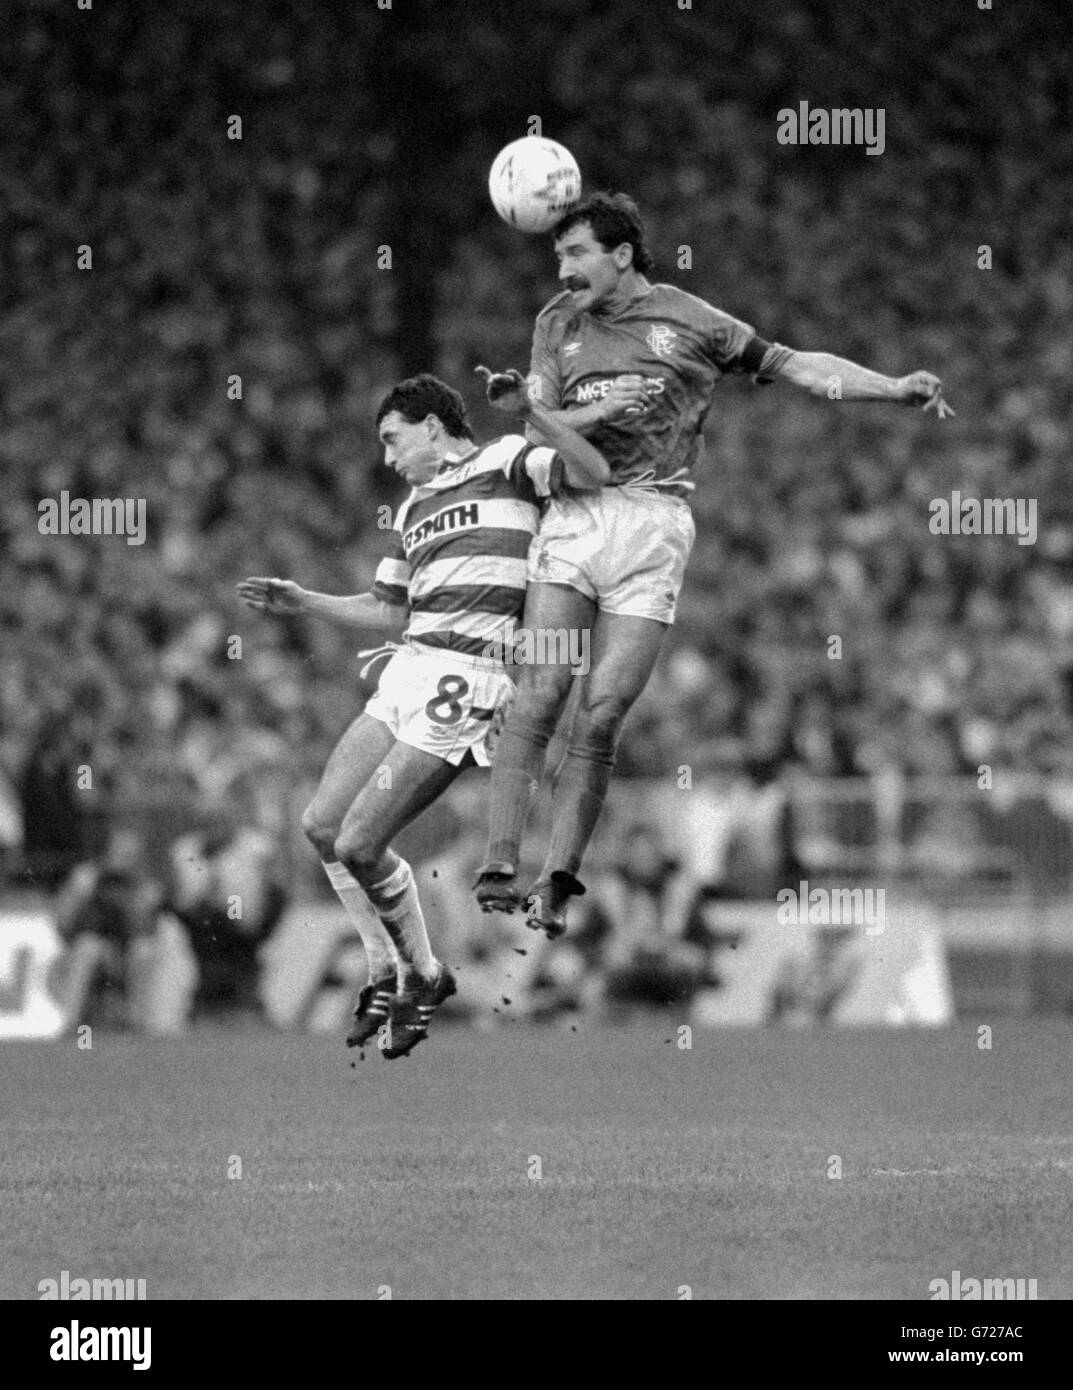 Rangers' player-manager Graeme Souness (right) gets to the ball ahead of Celtic's Paul McStay during the Old Firm clash at Parkhead which Celtic won 2-0. Stock Photo